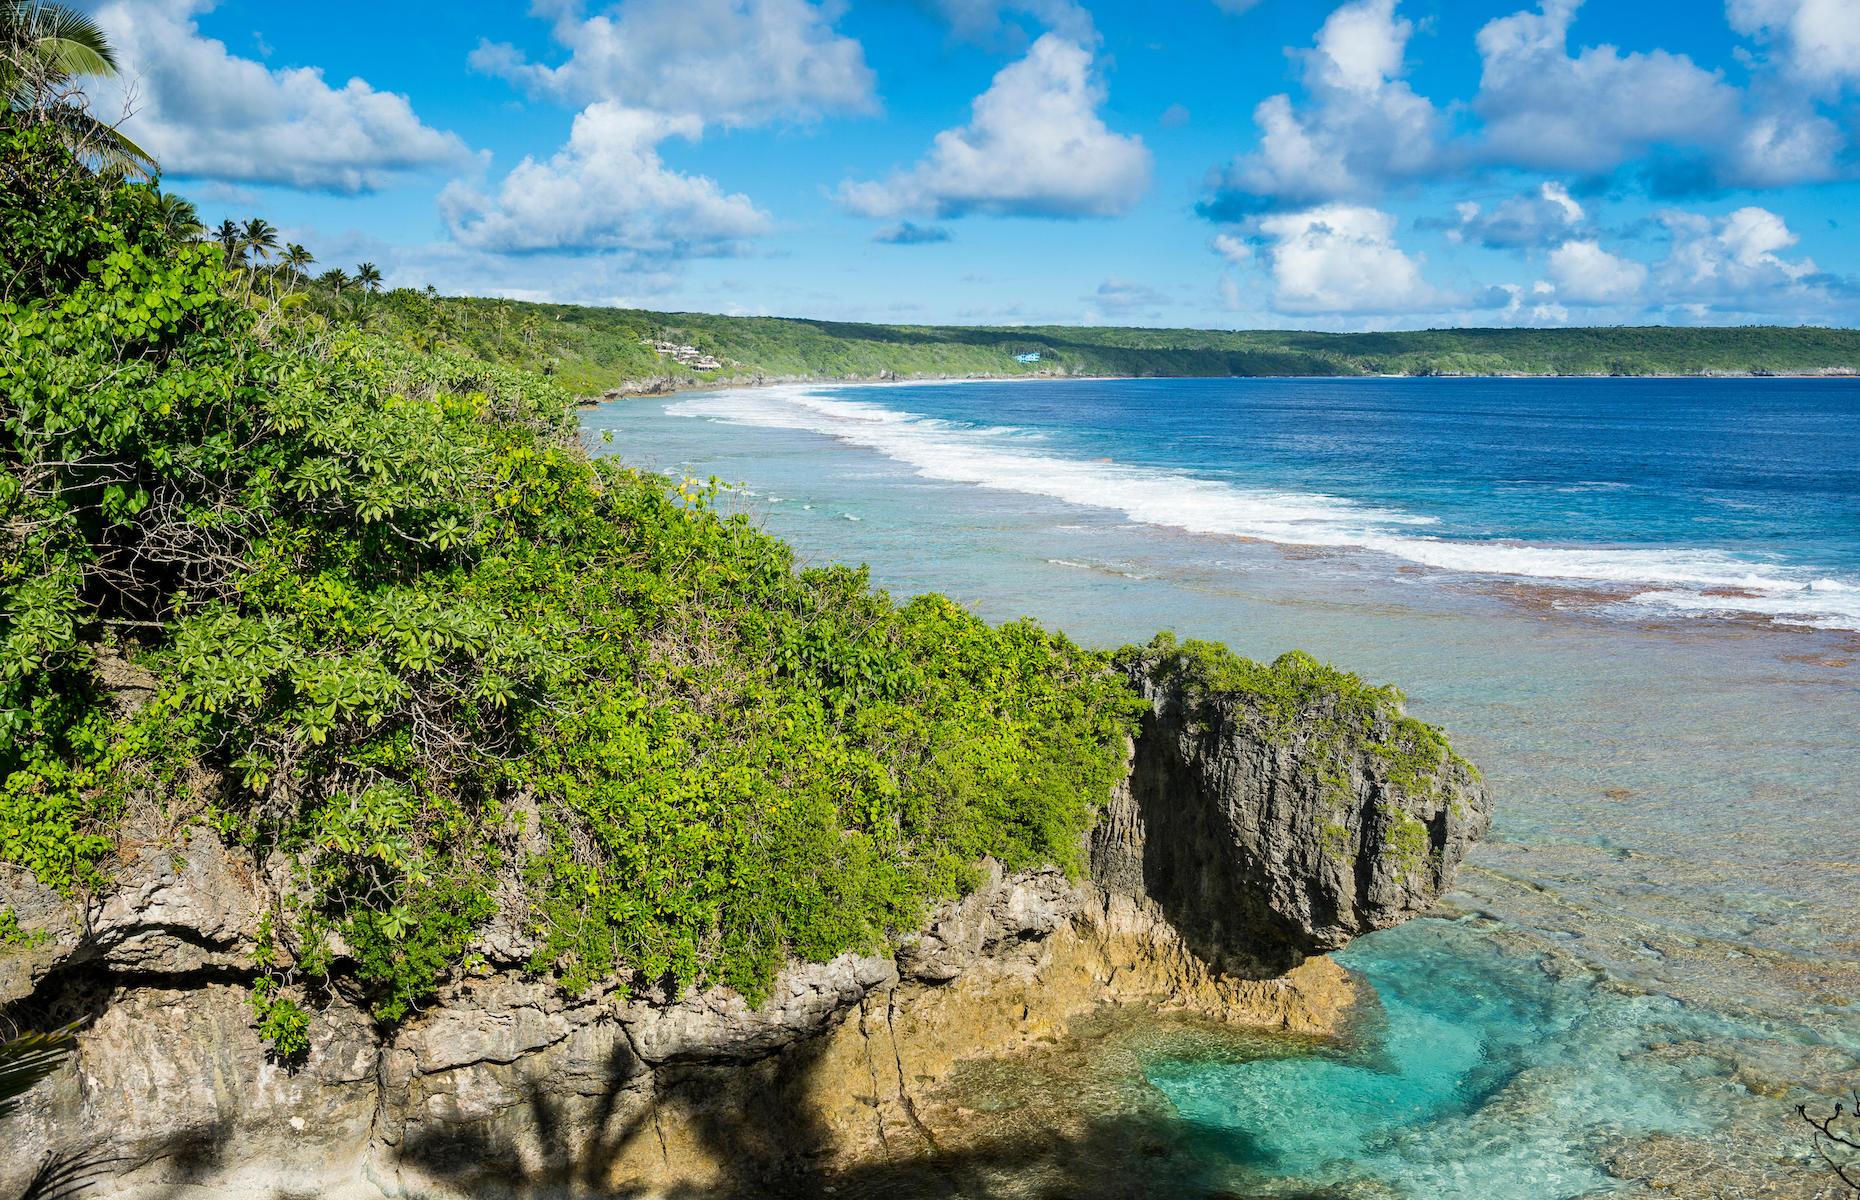 <p>It might be one of the largest raised coral atolls on Earth, but this Pacific island is as petite as countries come. Home to a population of less than 1,650 people, Niue is a self-governing island state in free association with New Zealand. Cast adrift 1,491 miles (2,400km) northeast of the Antipodean nation, it lies in the center of a triangle of other Polynesian islands – Tonga, Samoa and the Cook Islands – and is proudly the world's smallest self-governing nation. With just one large resort and several little guest houses and apartments, Niue is just the spot for that get-away-from-it-all slice of island life.</p>